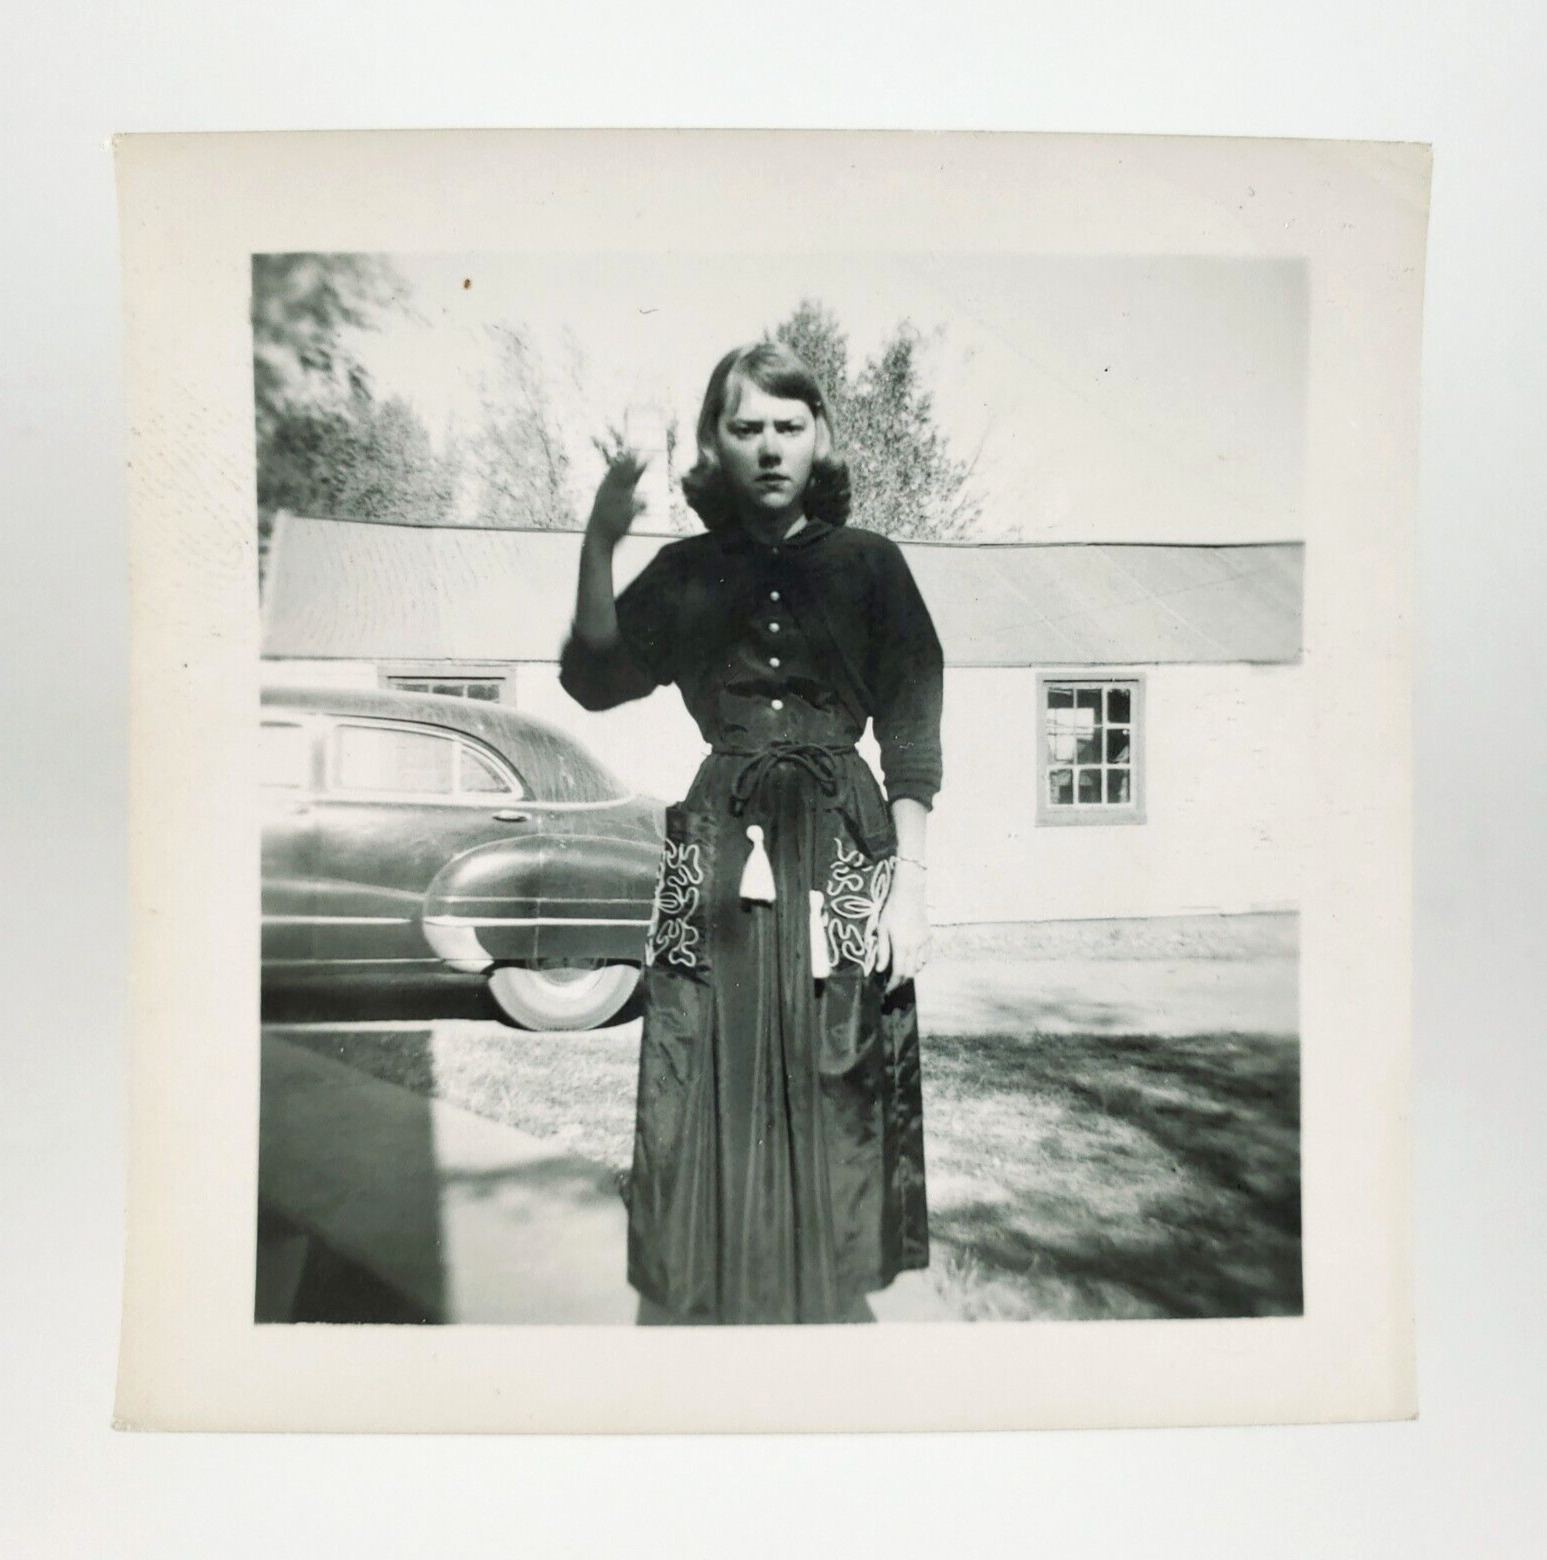 Angry Witch Casting Spell Photo 1950s Old Car Woman Annoyed Lady Snapshot A4227